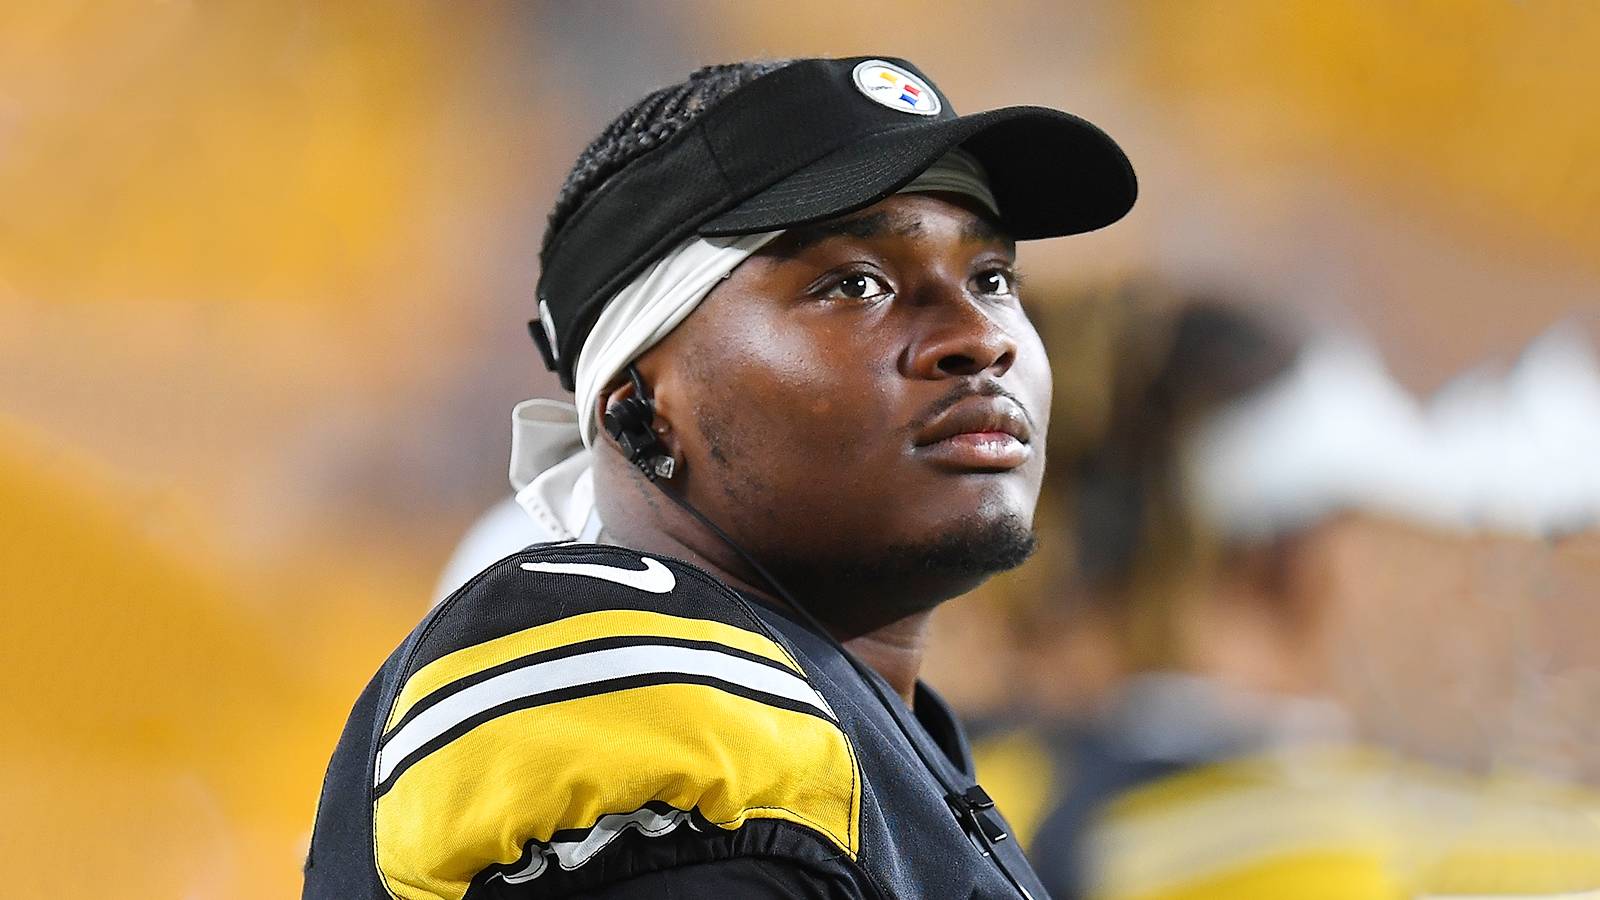 Dwayne Haskins #3 of the Pittsburgh Steelers looks on during the game against the Detroit Lions